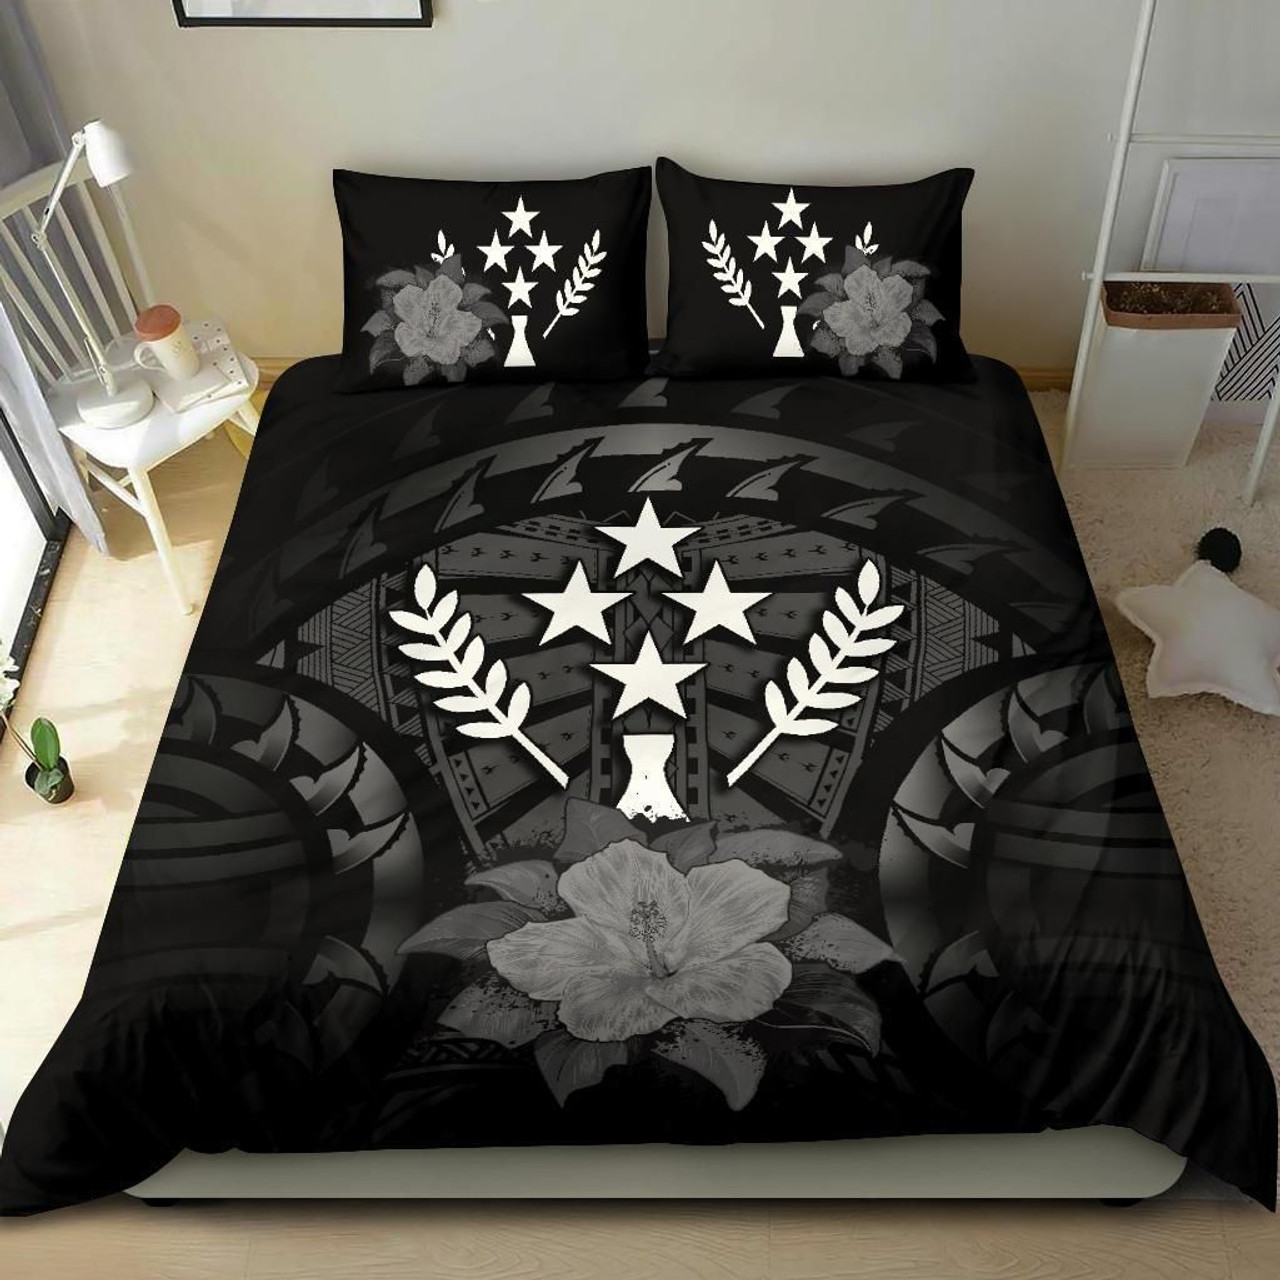 Polynesian Bedding Set Federated States Of Micronesia Duvet Cover Set Bright Style 4